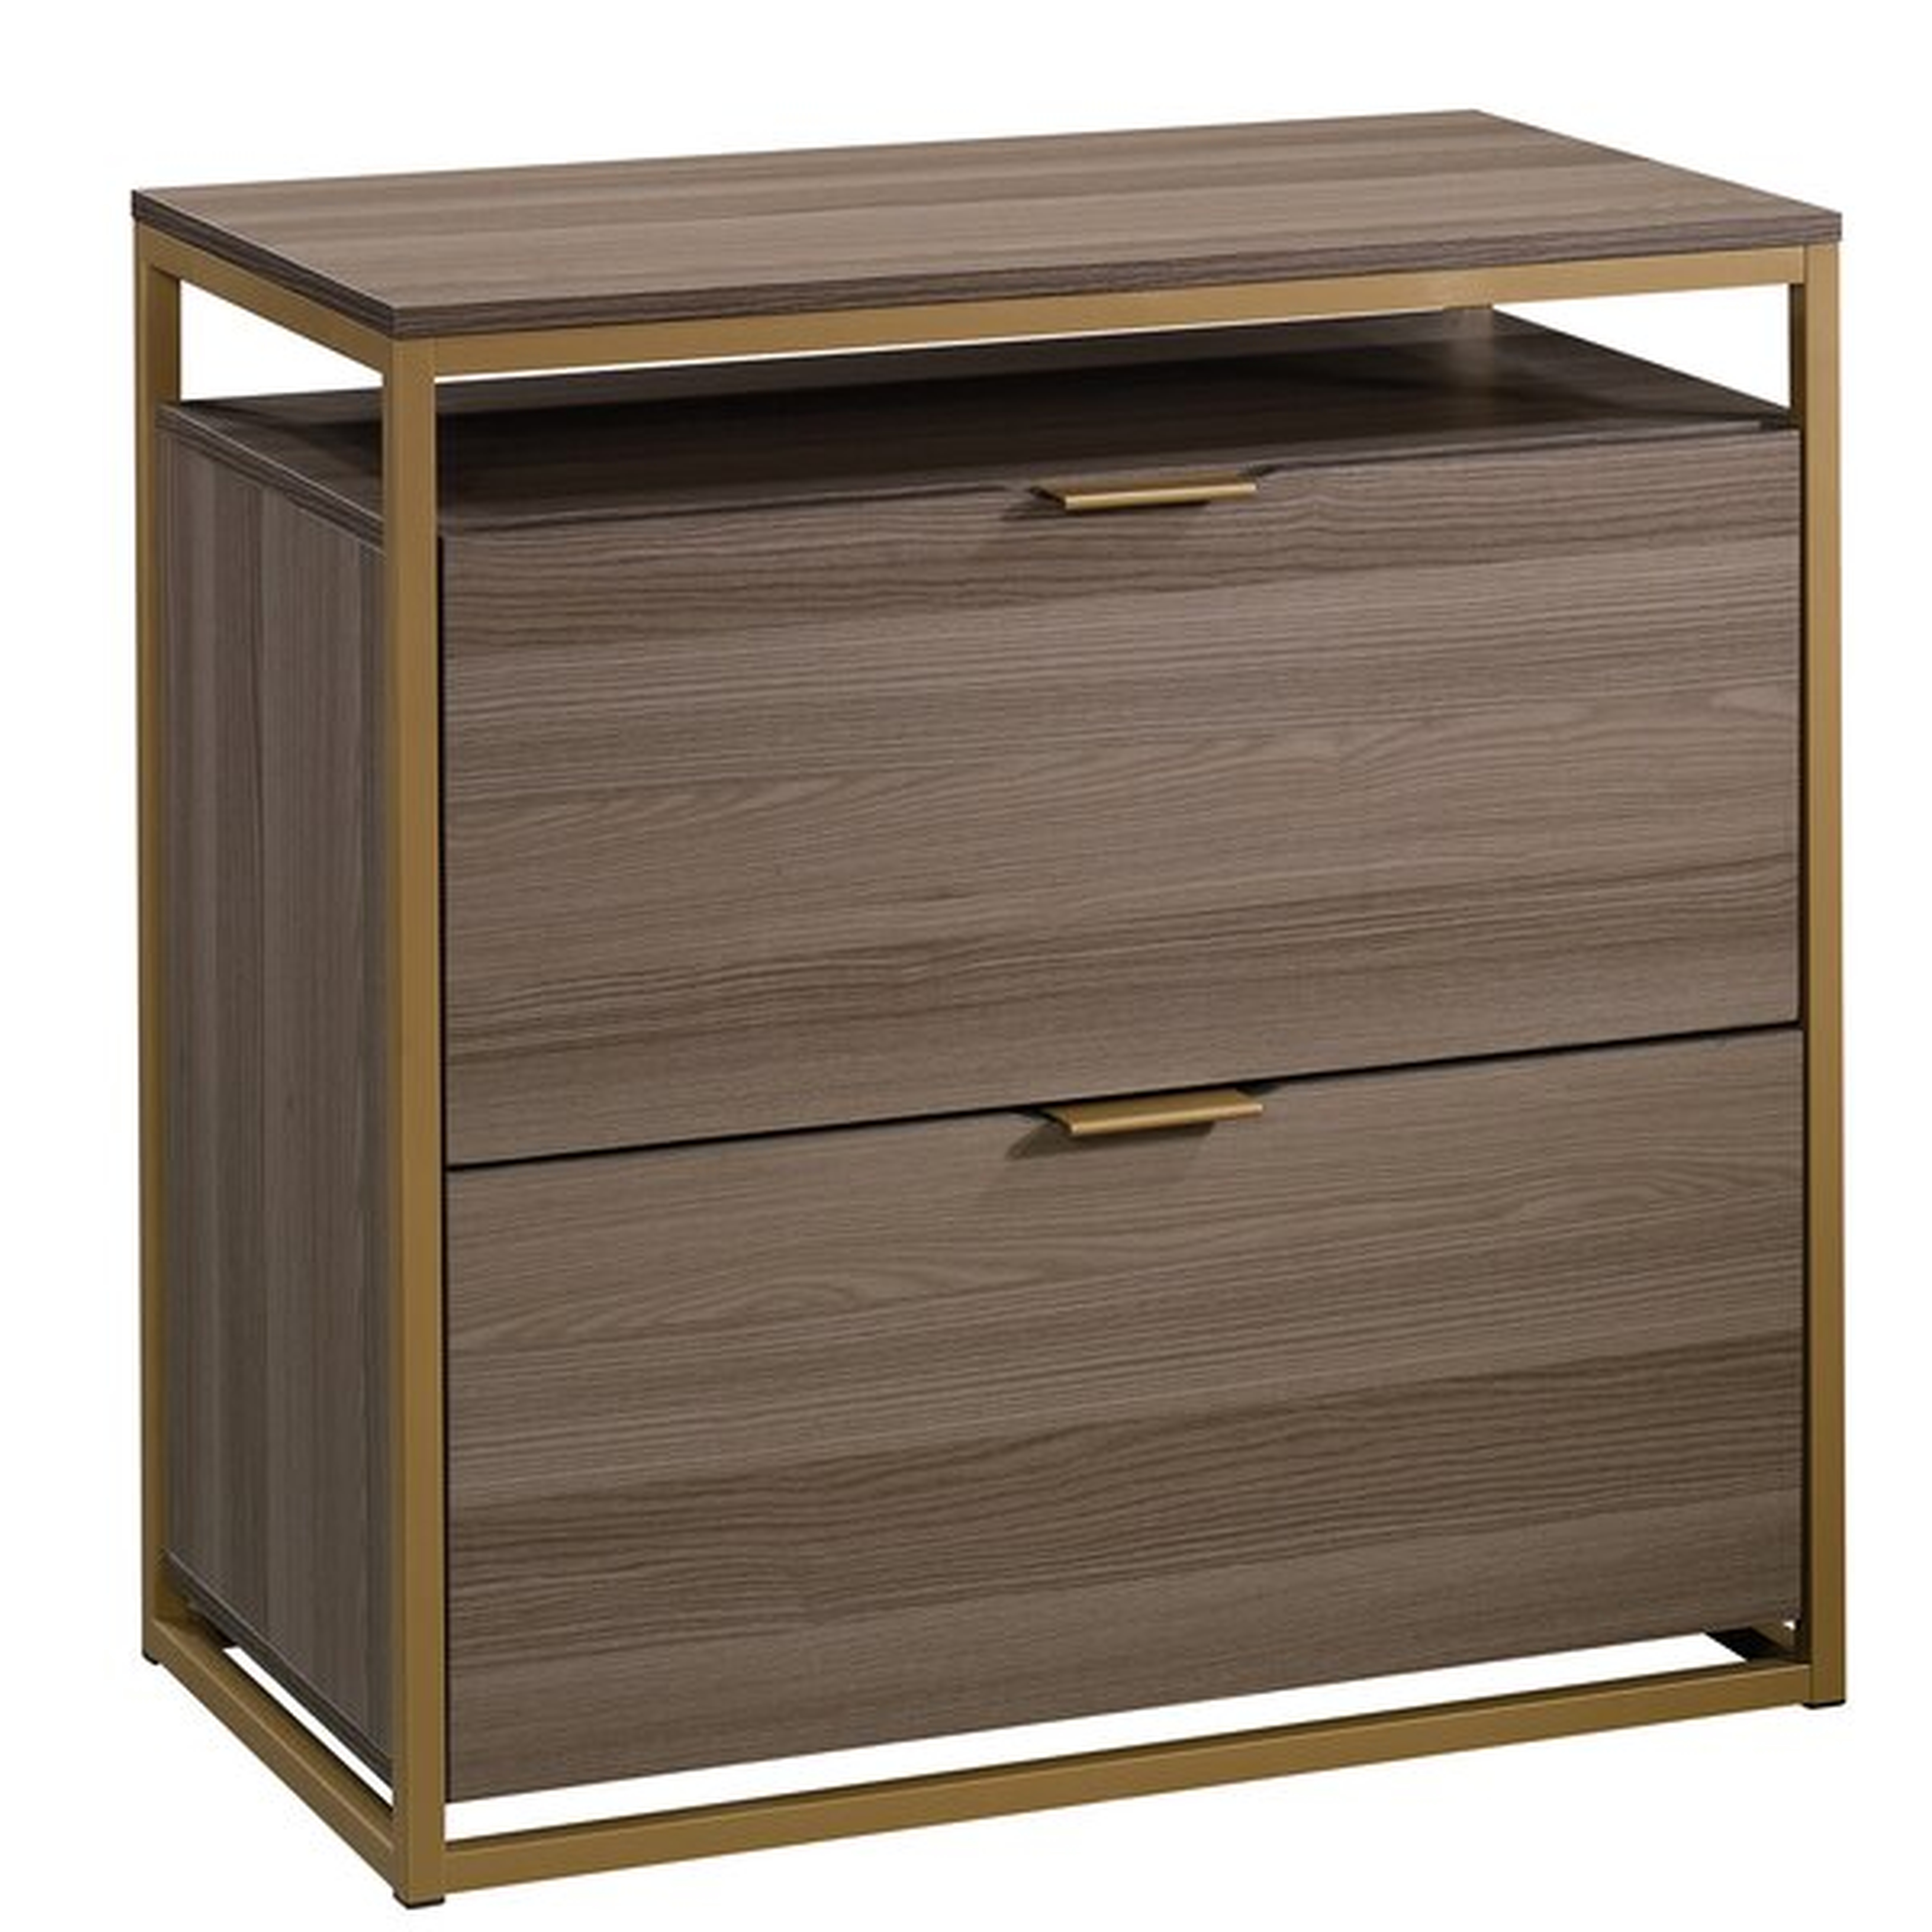 Haight 2-Drawer Lateral Filing Cabinet - Wayfair